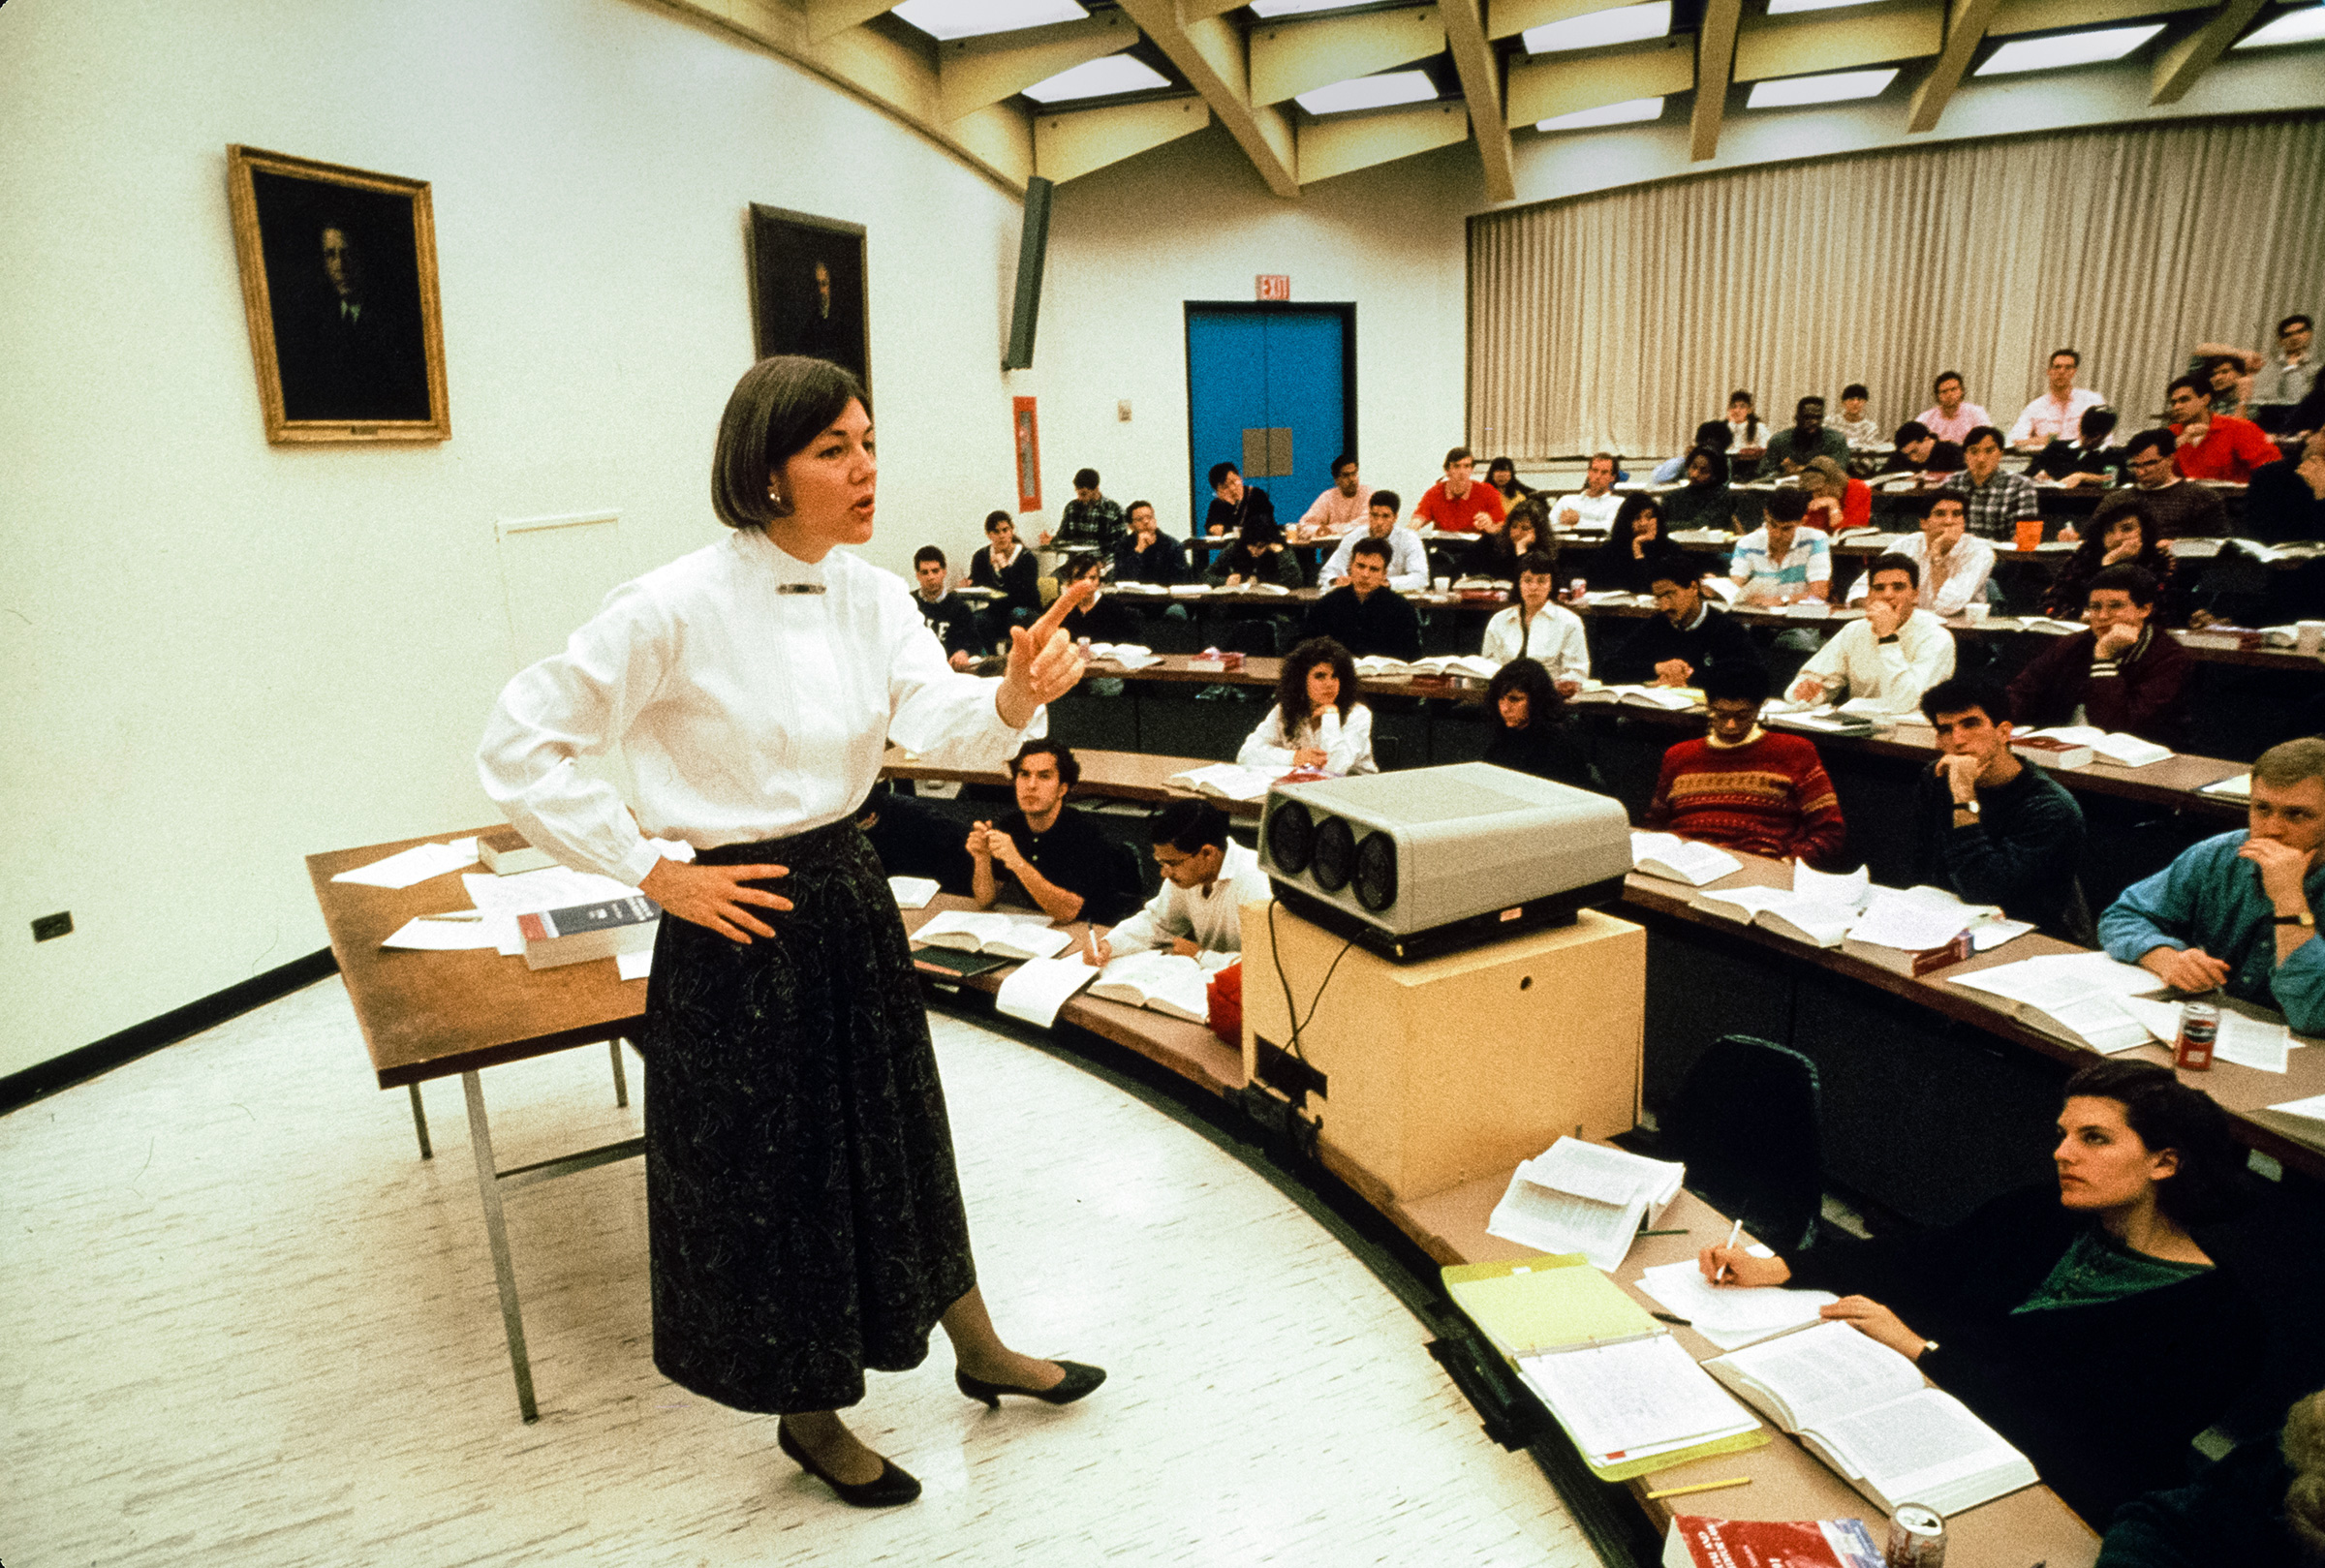 Warren teaching at the University of Pennsylvania Law School in Philadelphia in the early 1990s. (Leif Skoogfors—Getty Images)